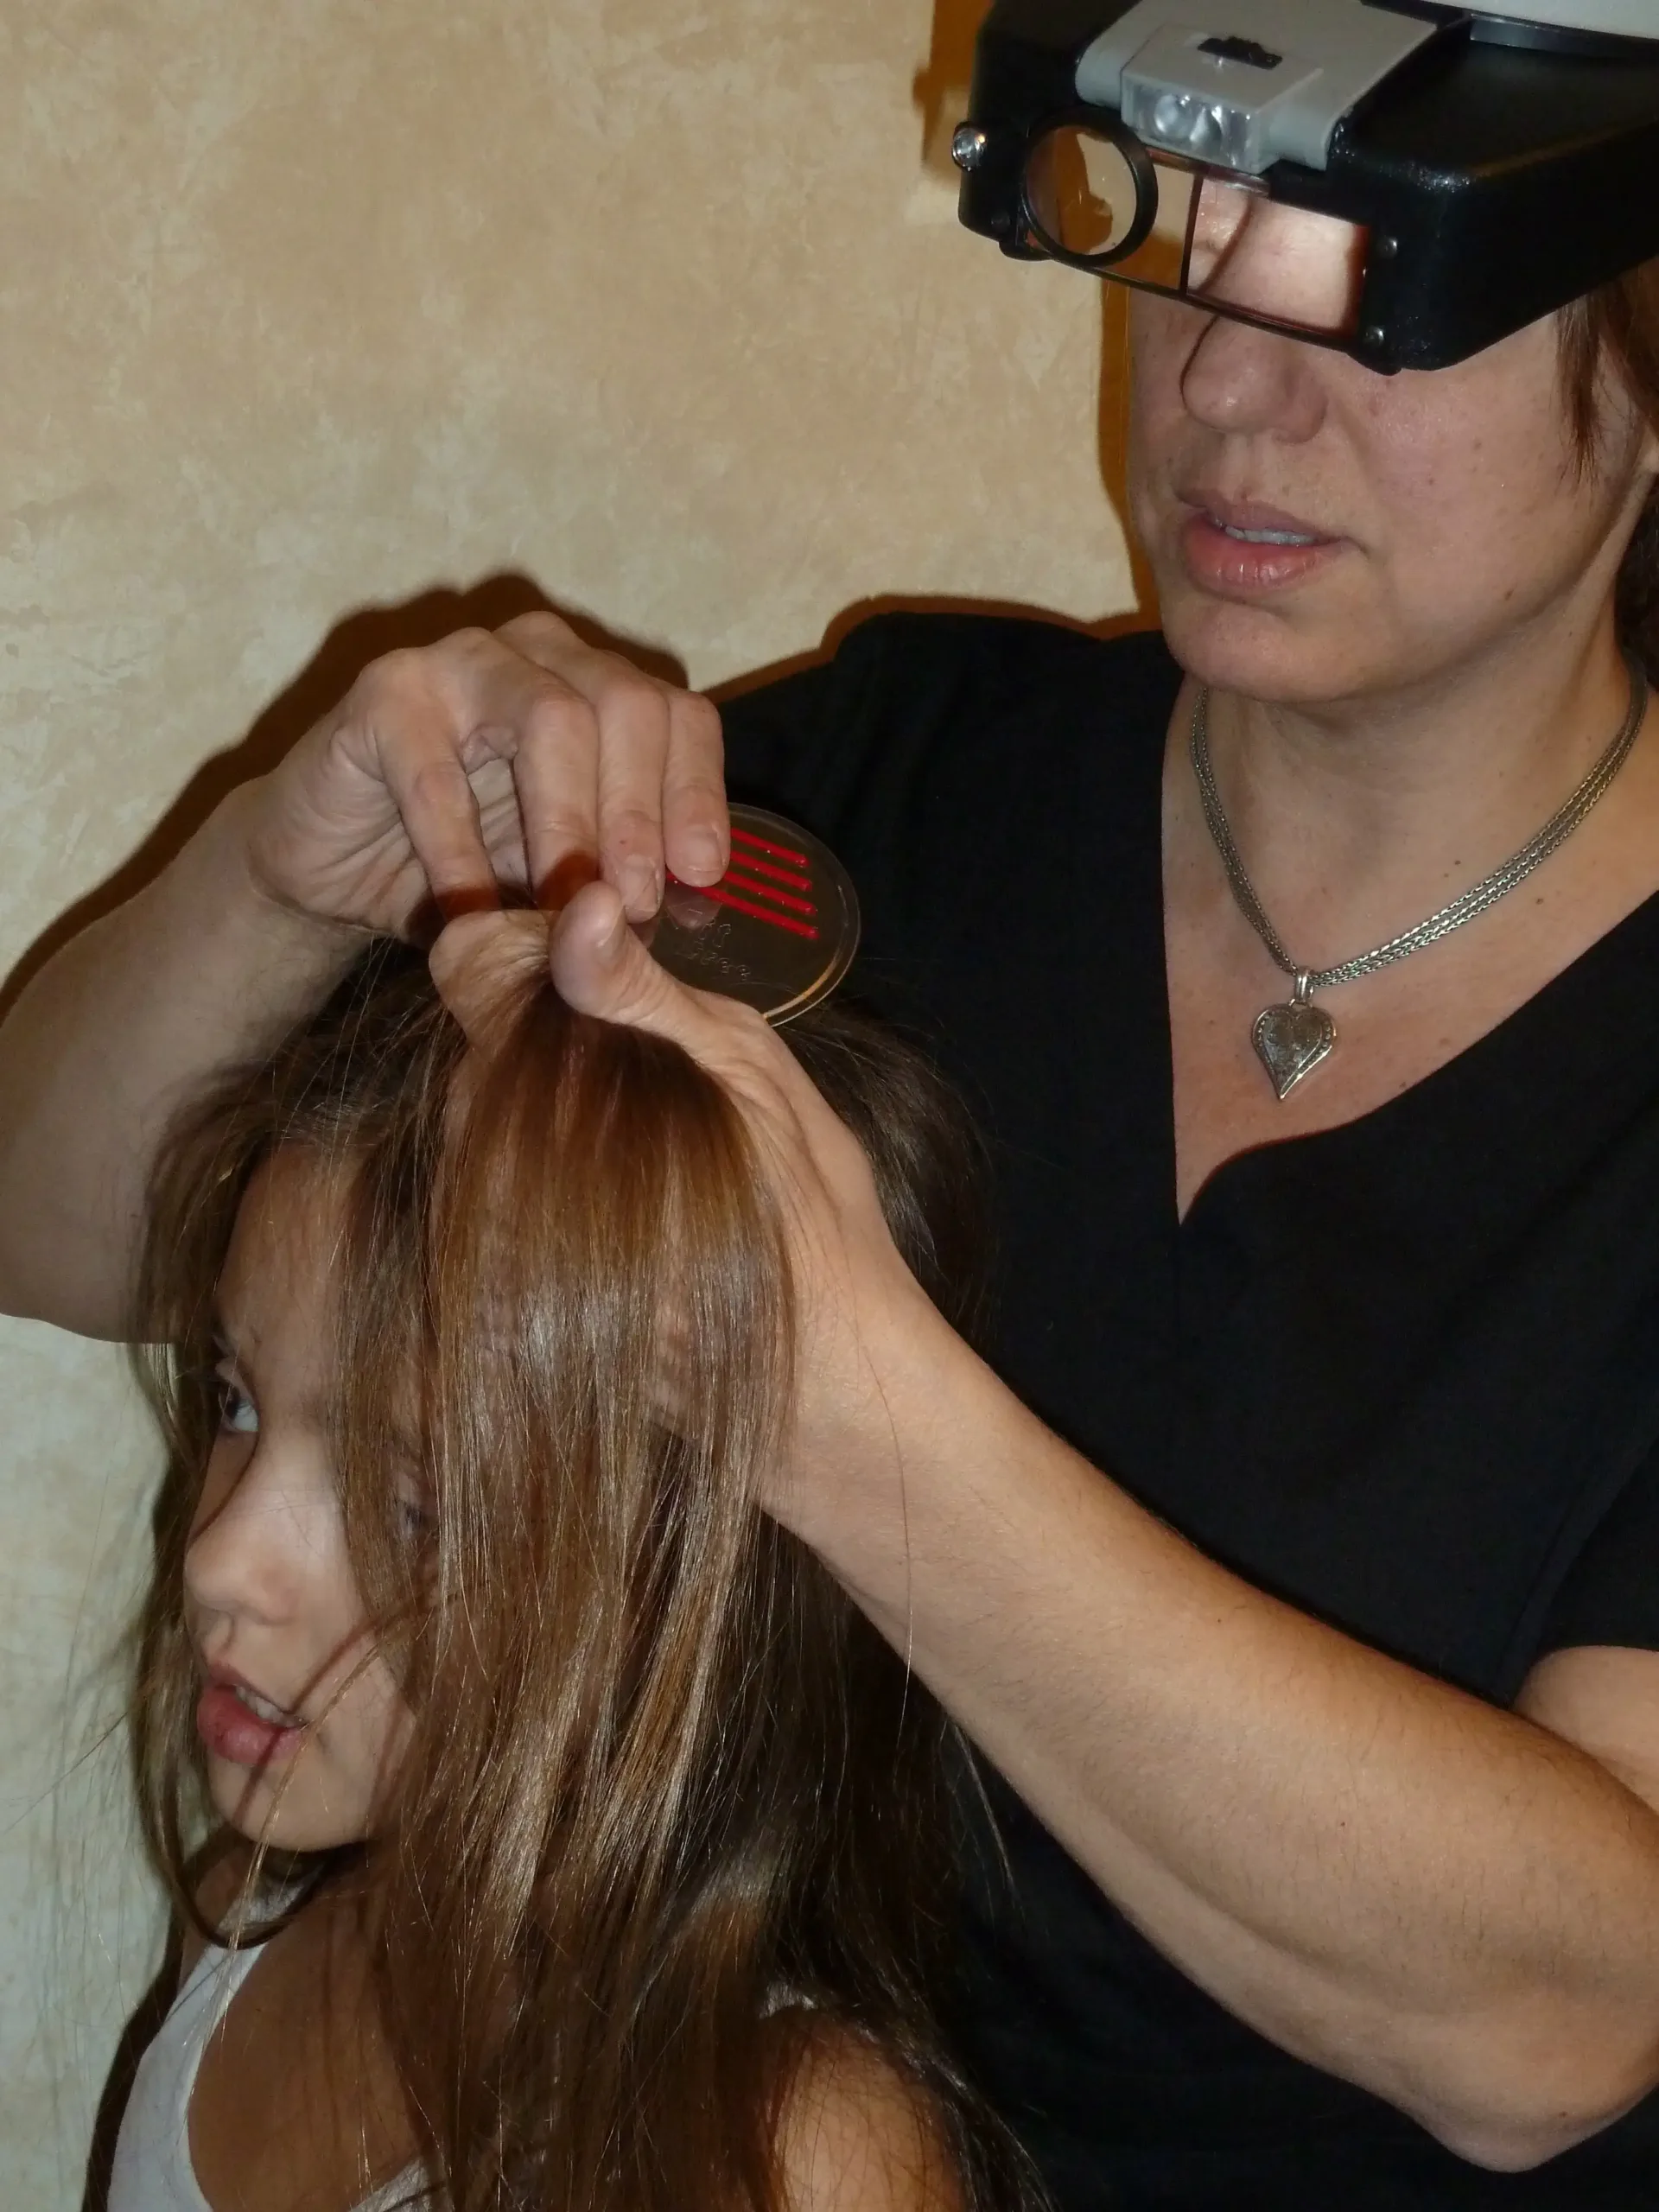 Lice Tamers makes house calls and services all of Nassau and Suffolk Counties.